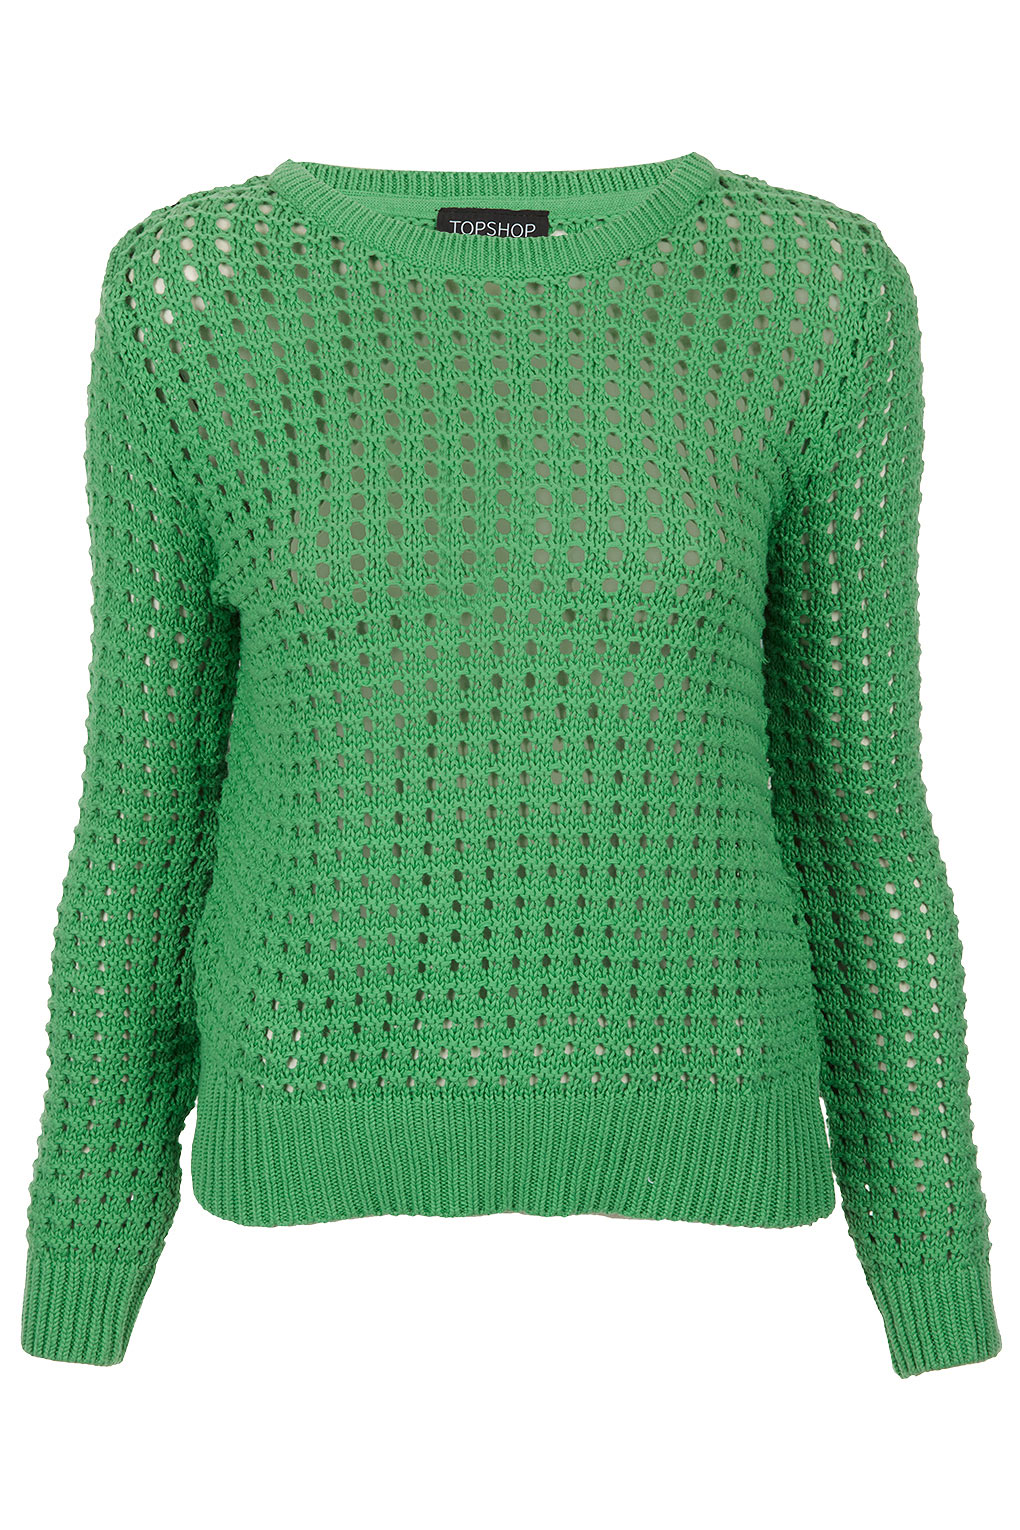 Topshop Knitted Grid Stitch Jumper in Green | Lyst